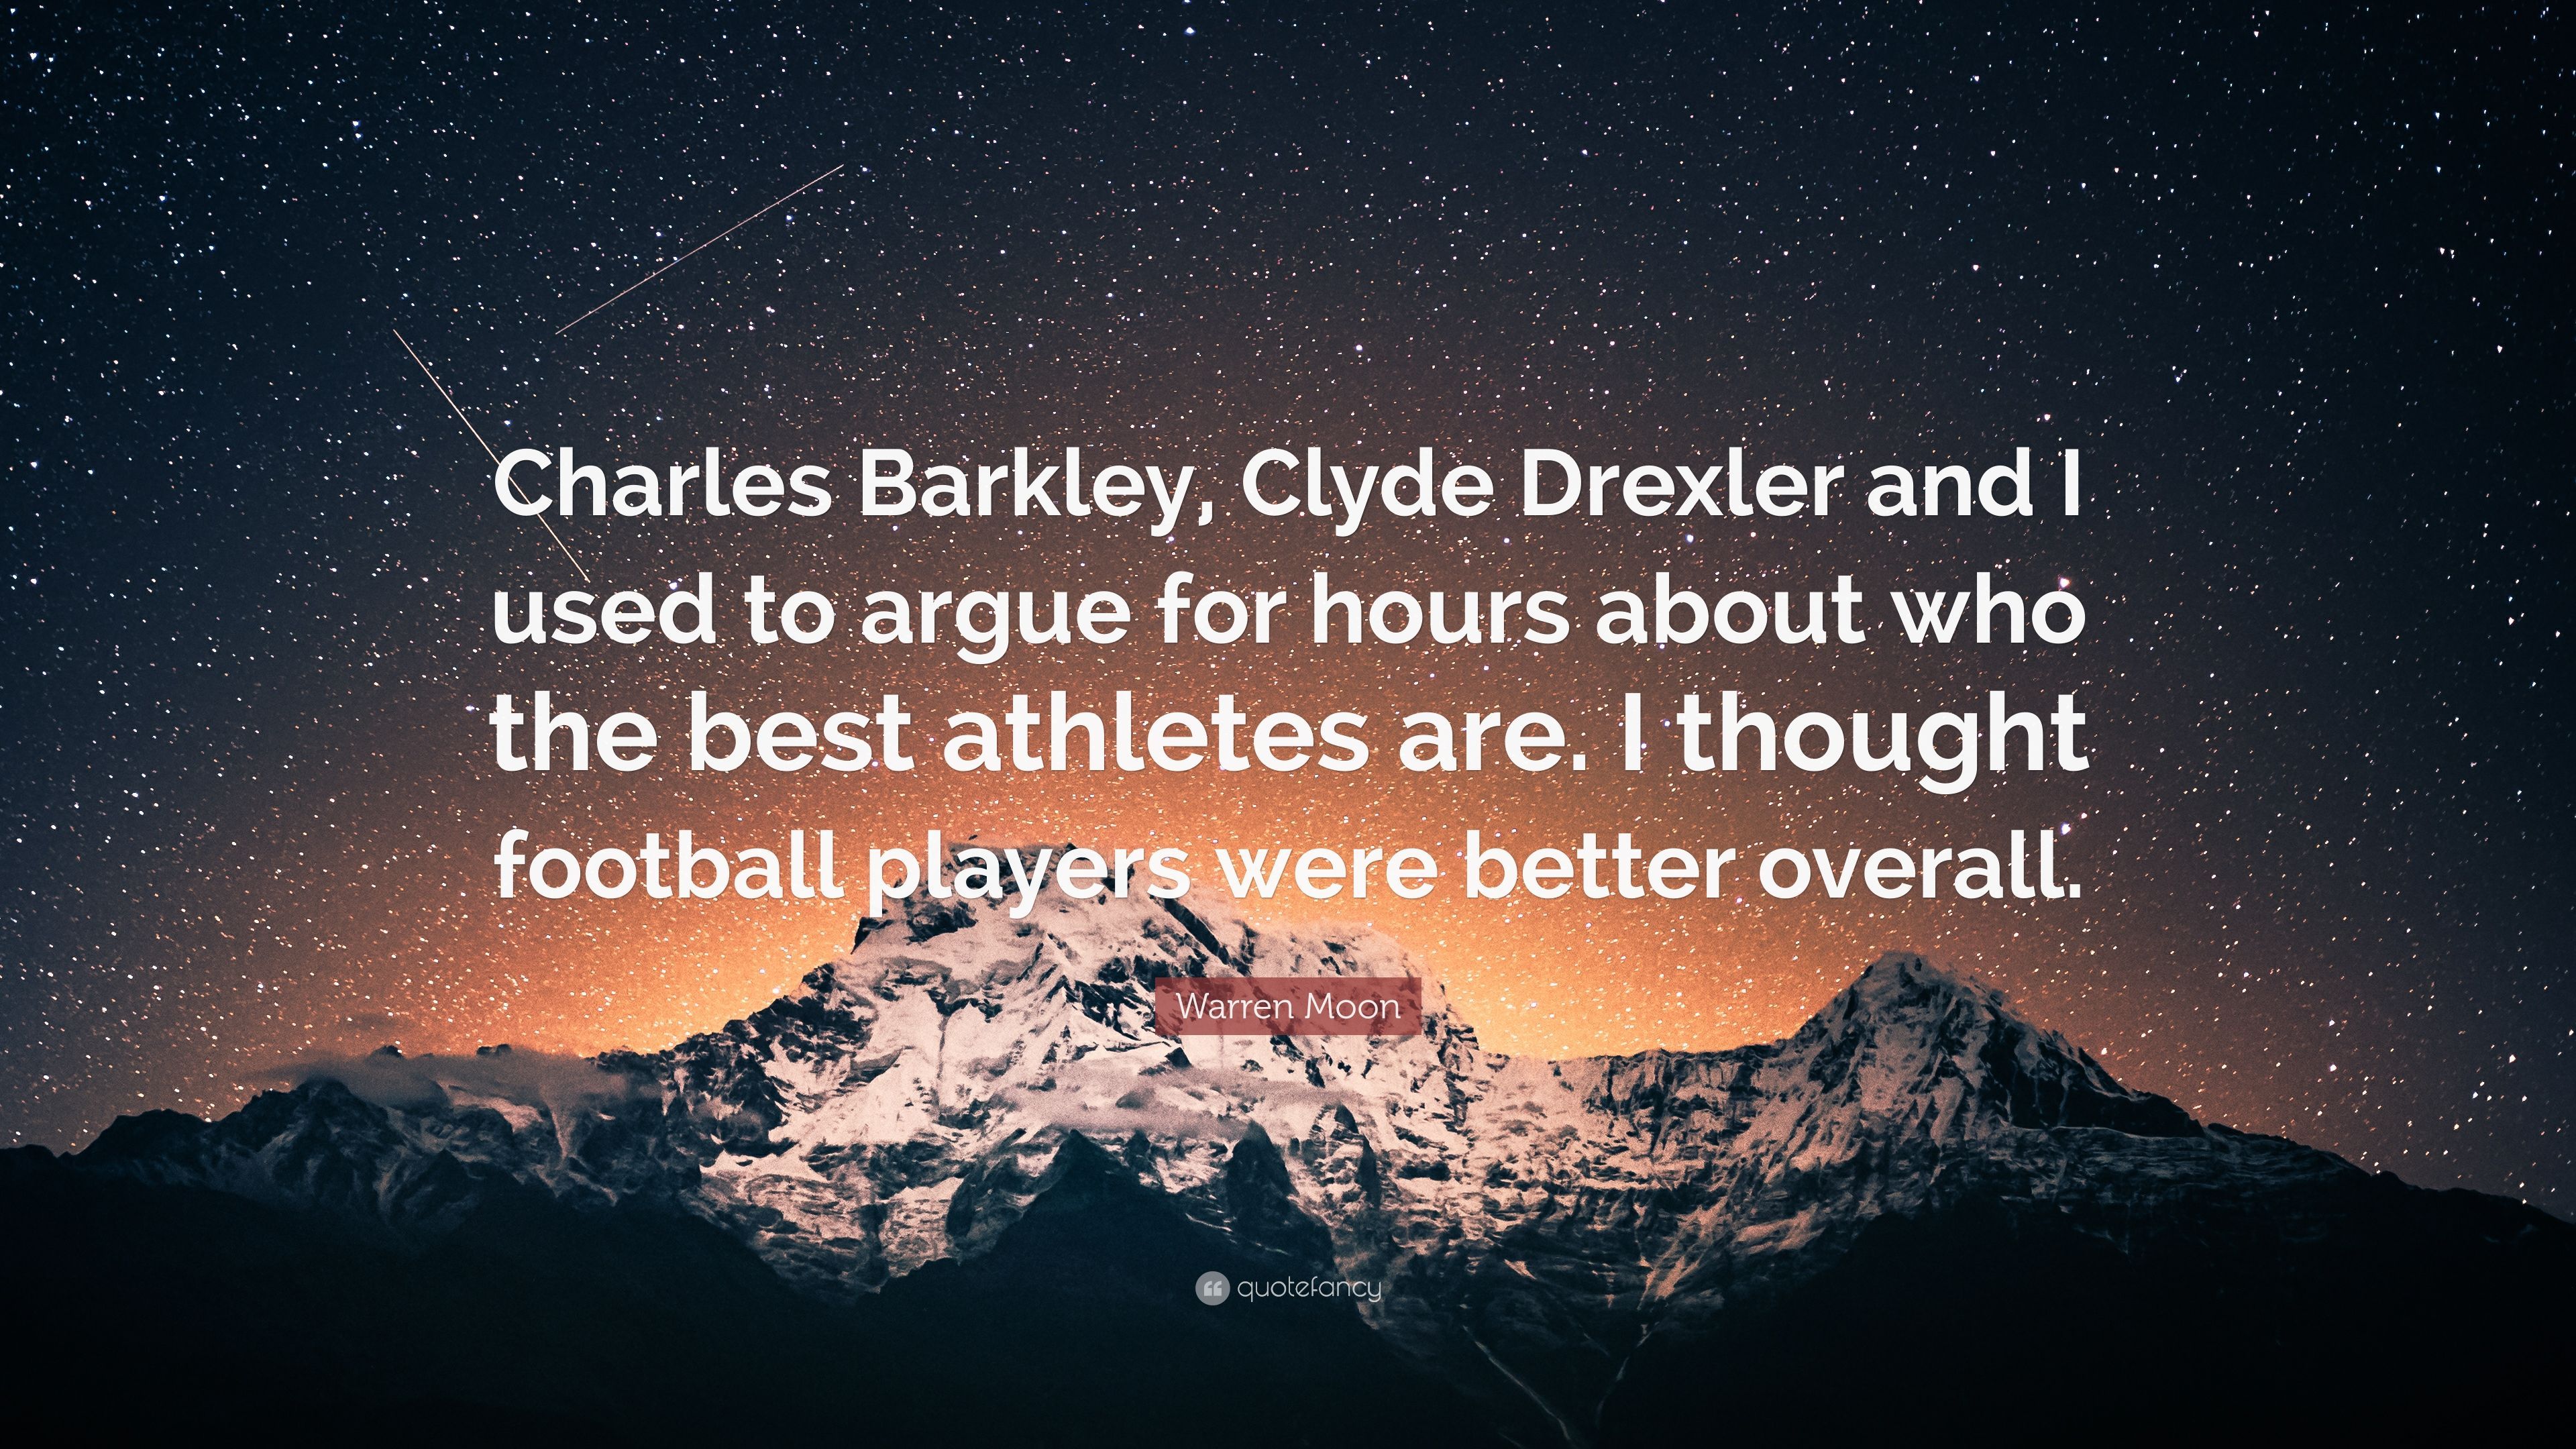 Warren Moon Quote: “Charles Barkley, Clyde Drexler and I used to